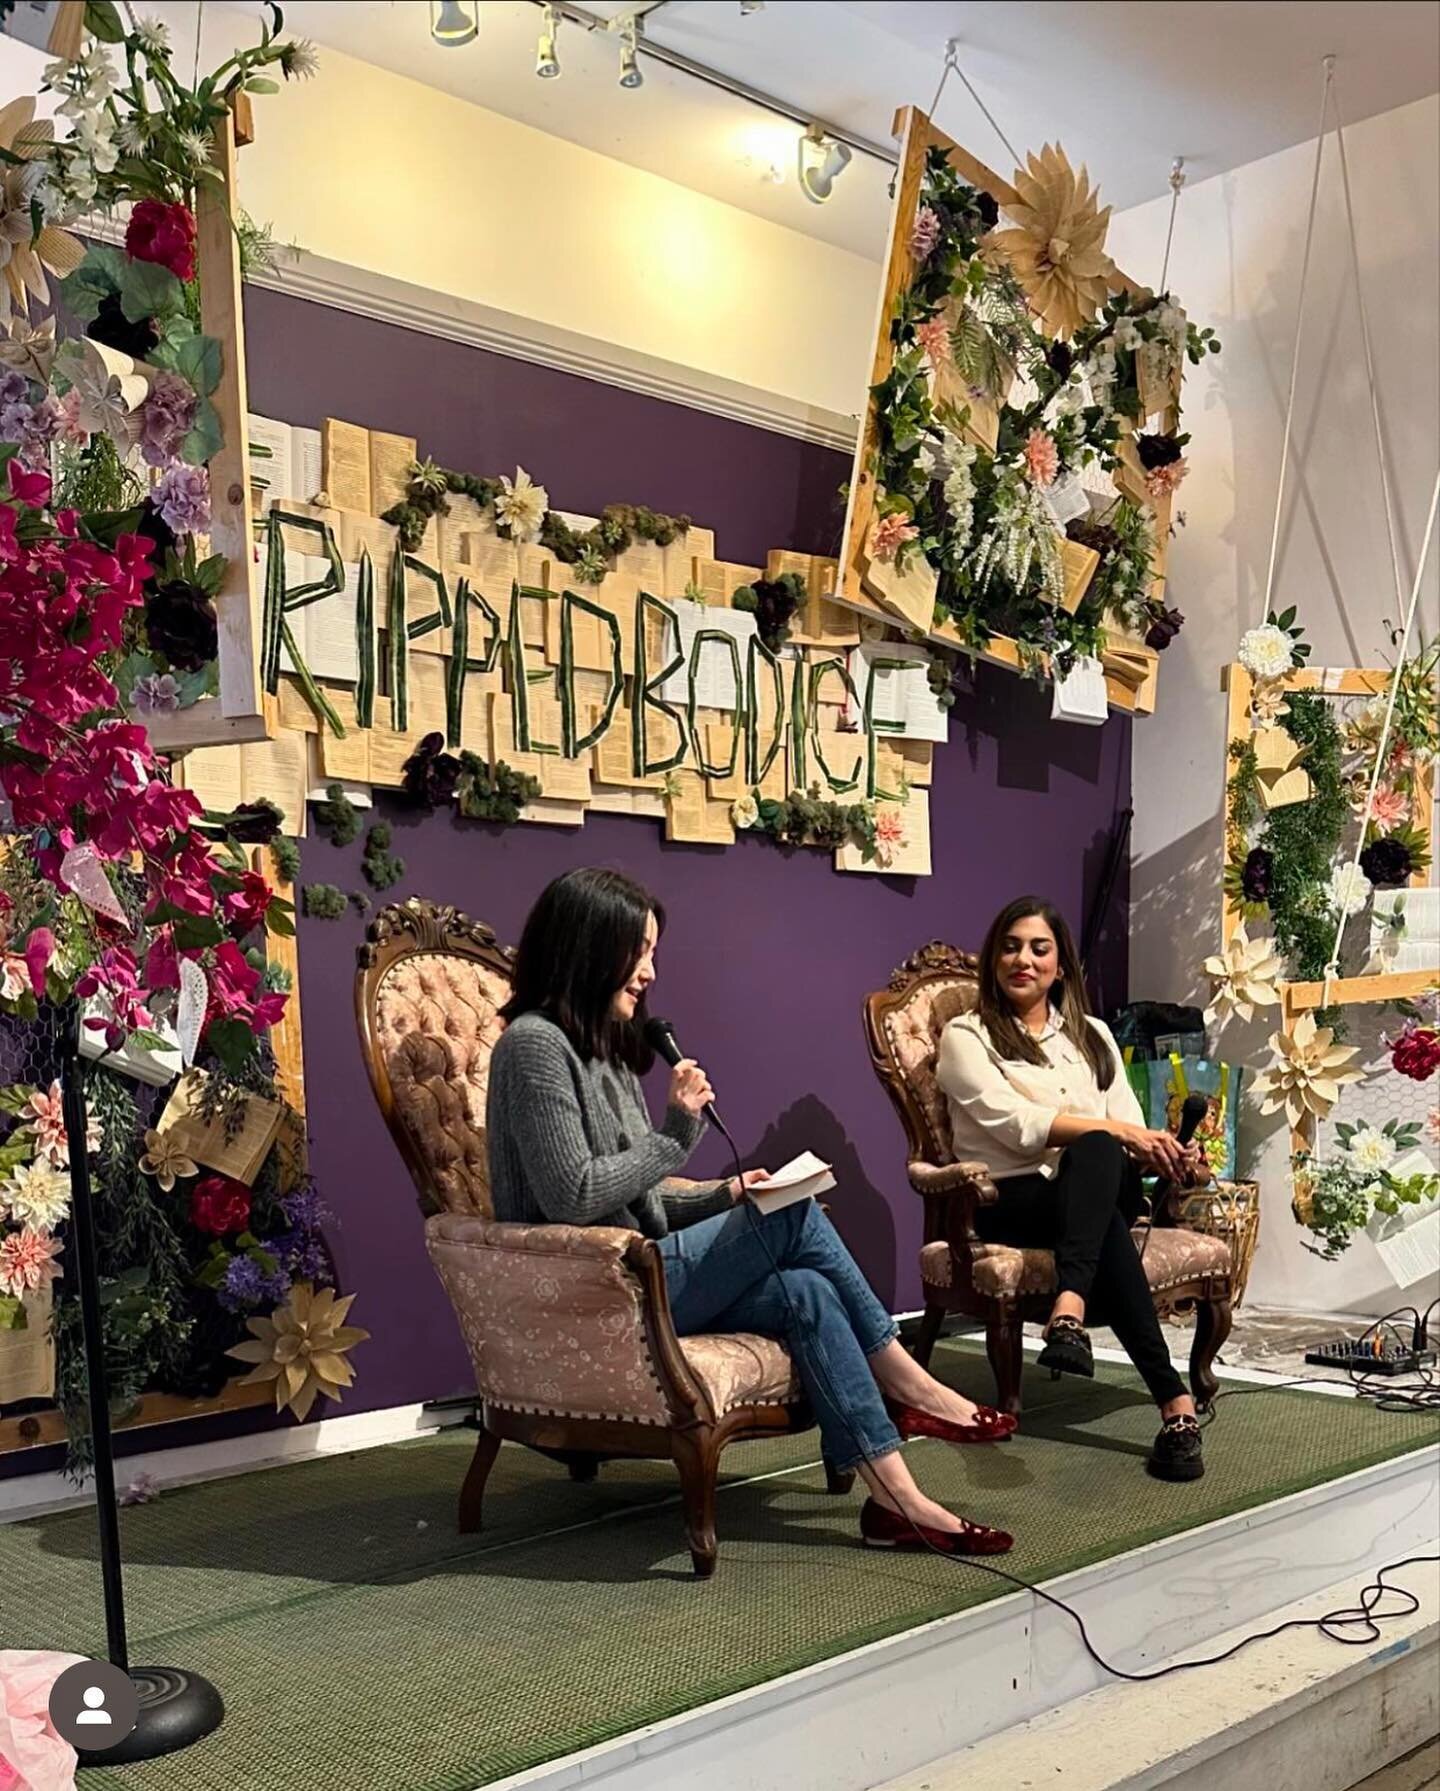 It was a quick 24 hours in LA to visit @therippedbodice! Getting to be in convo with @laurenkjessen was so wonderful and she asked such thoughtful questions. Getting to have a book talk at The Ripped Bodice is something I get to now cross off my roma